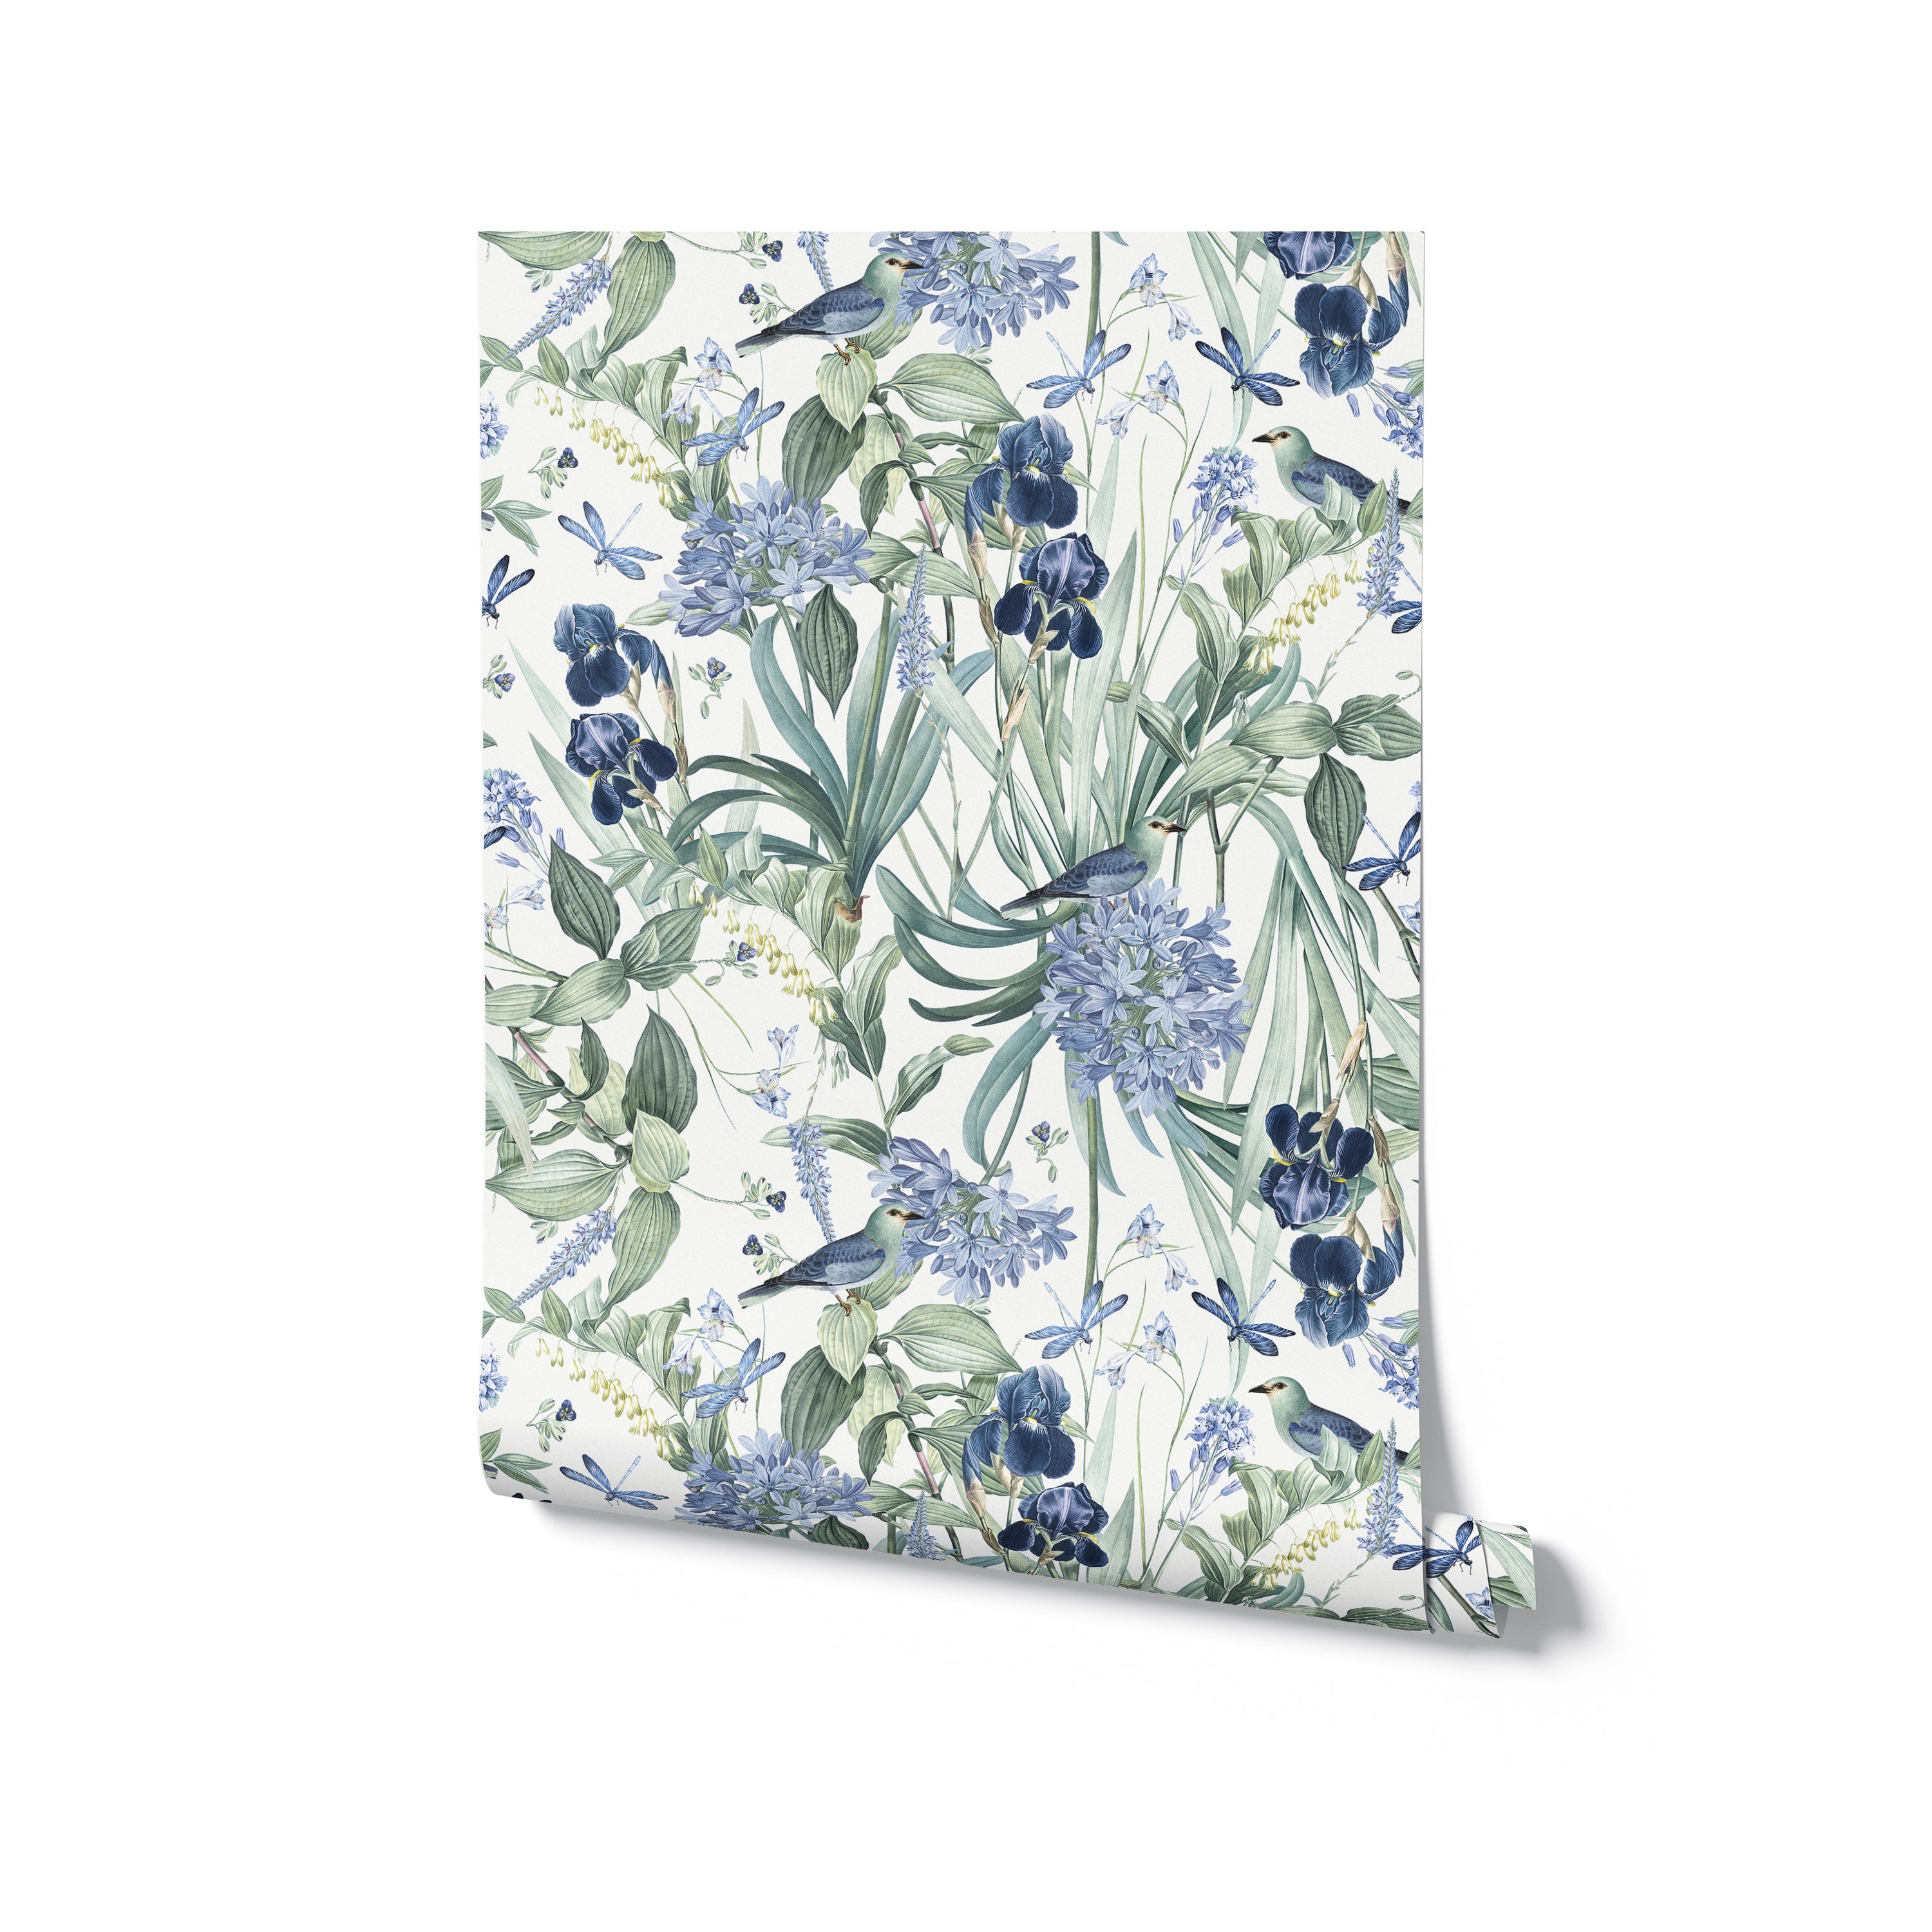 A roll of Mint Floral Wallpaper presented vertically, displaying a lush pattern of blue and green hues. The design is rich with detailed illustrations of flowers, birds, and dragonflies, perfect for bringing a touch of nature into any interior space.